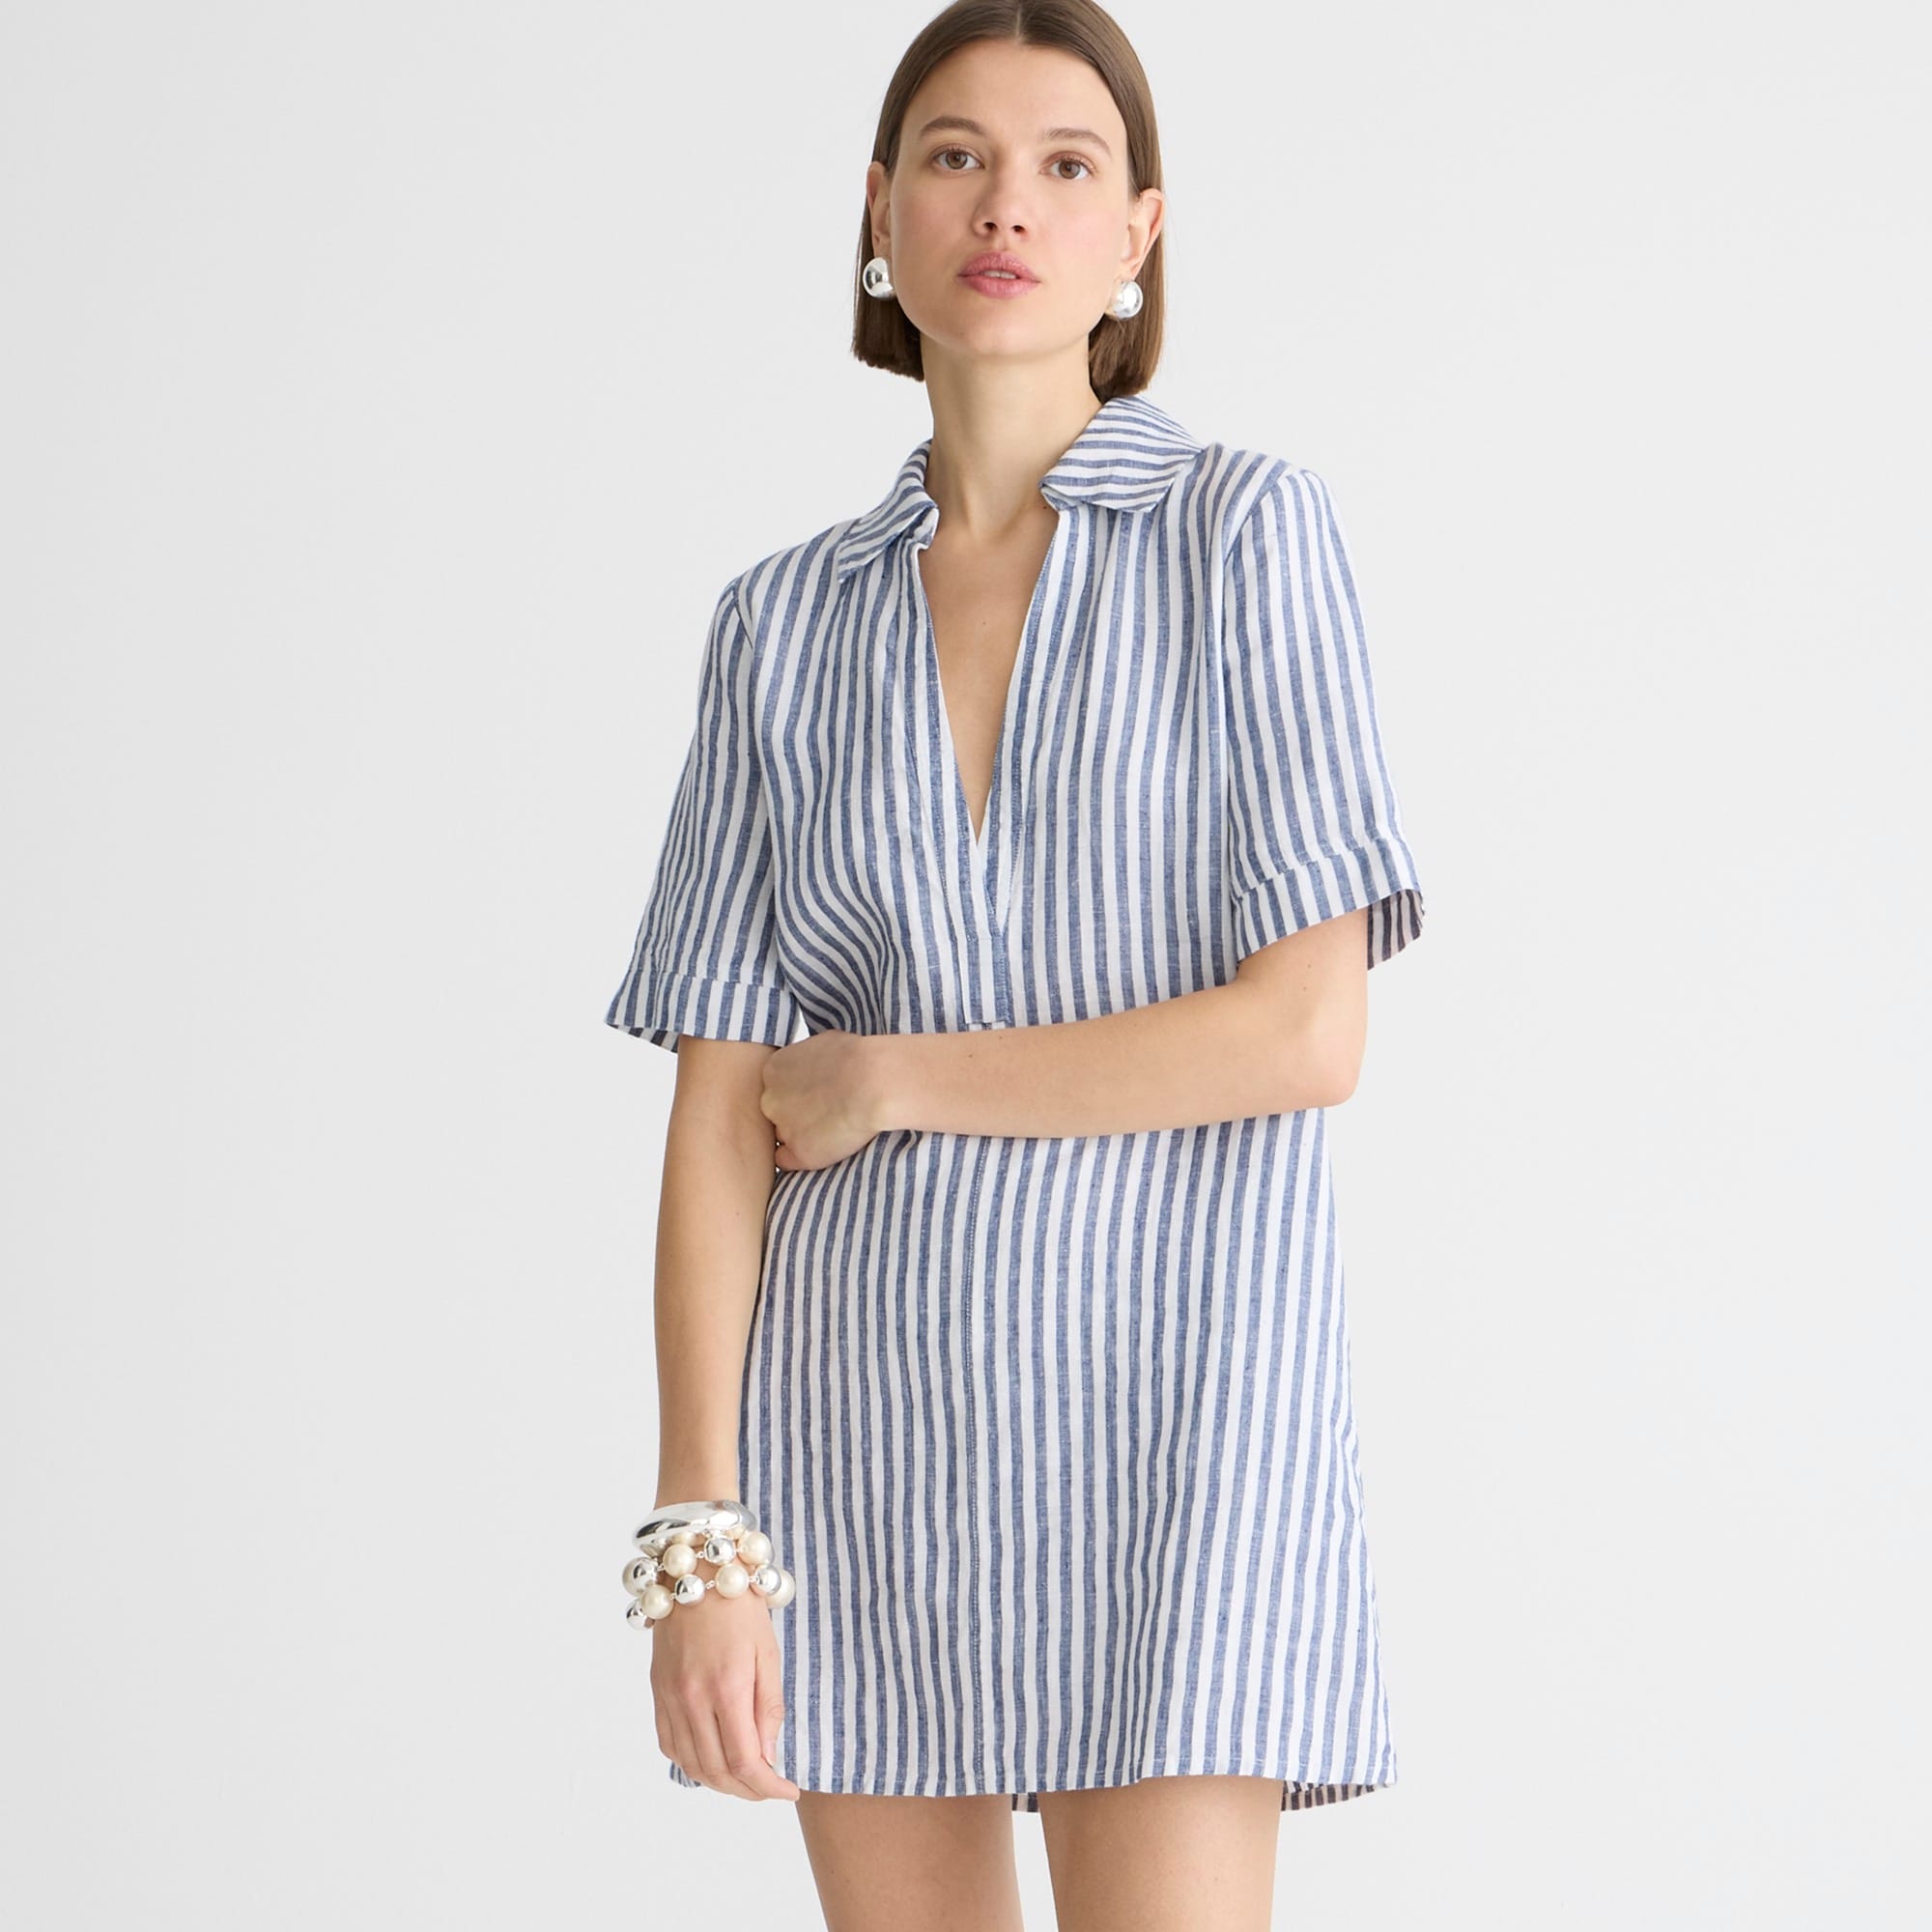  Tall Bungalow popover dress in striped linen